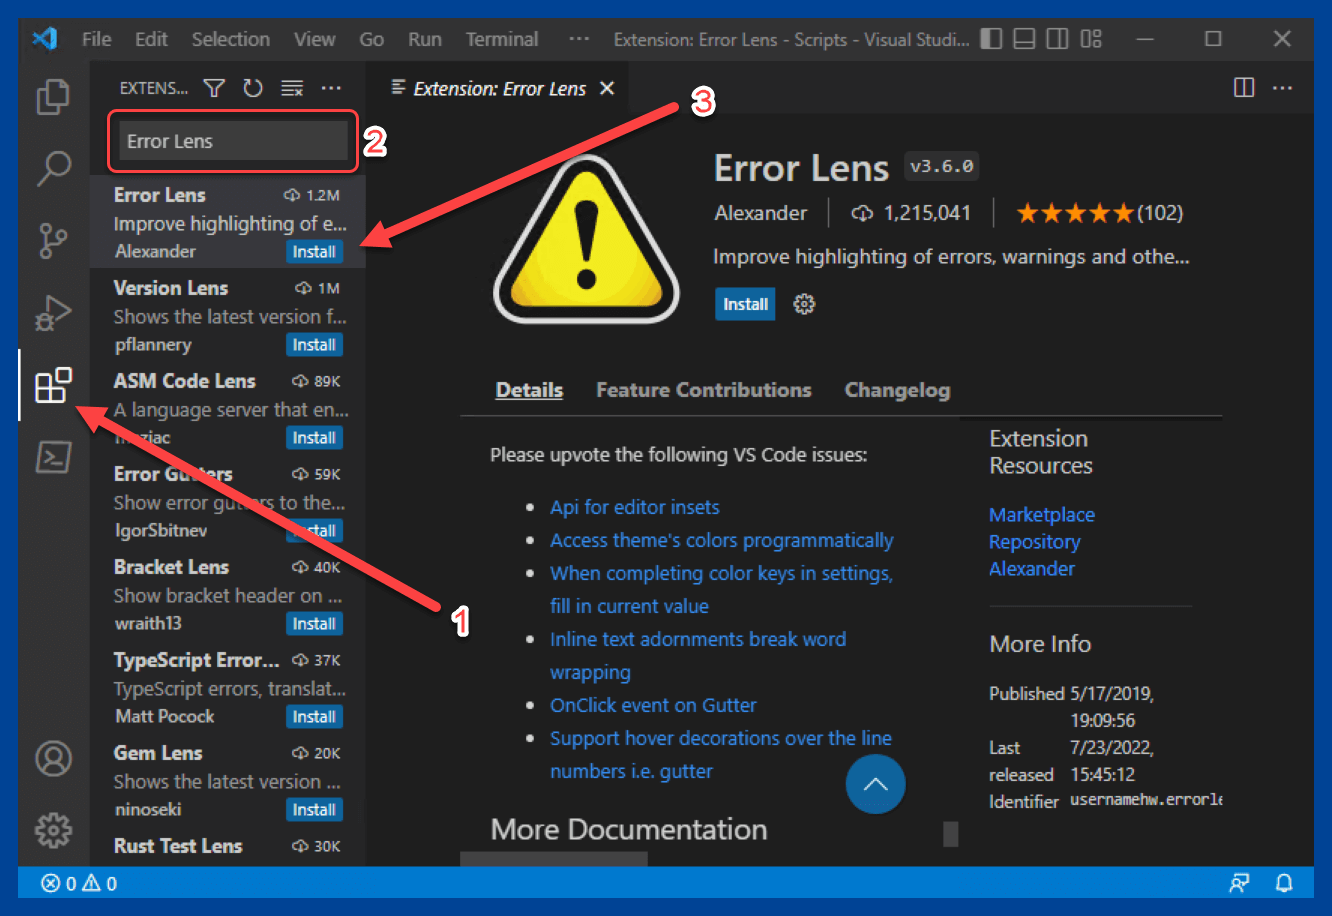 Adding the Error Lens extension to VS Code